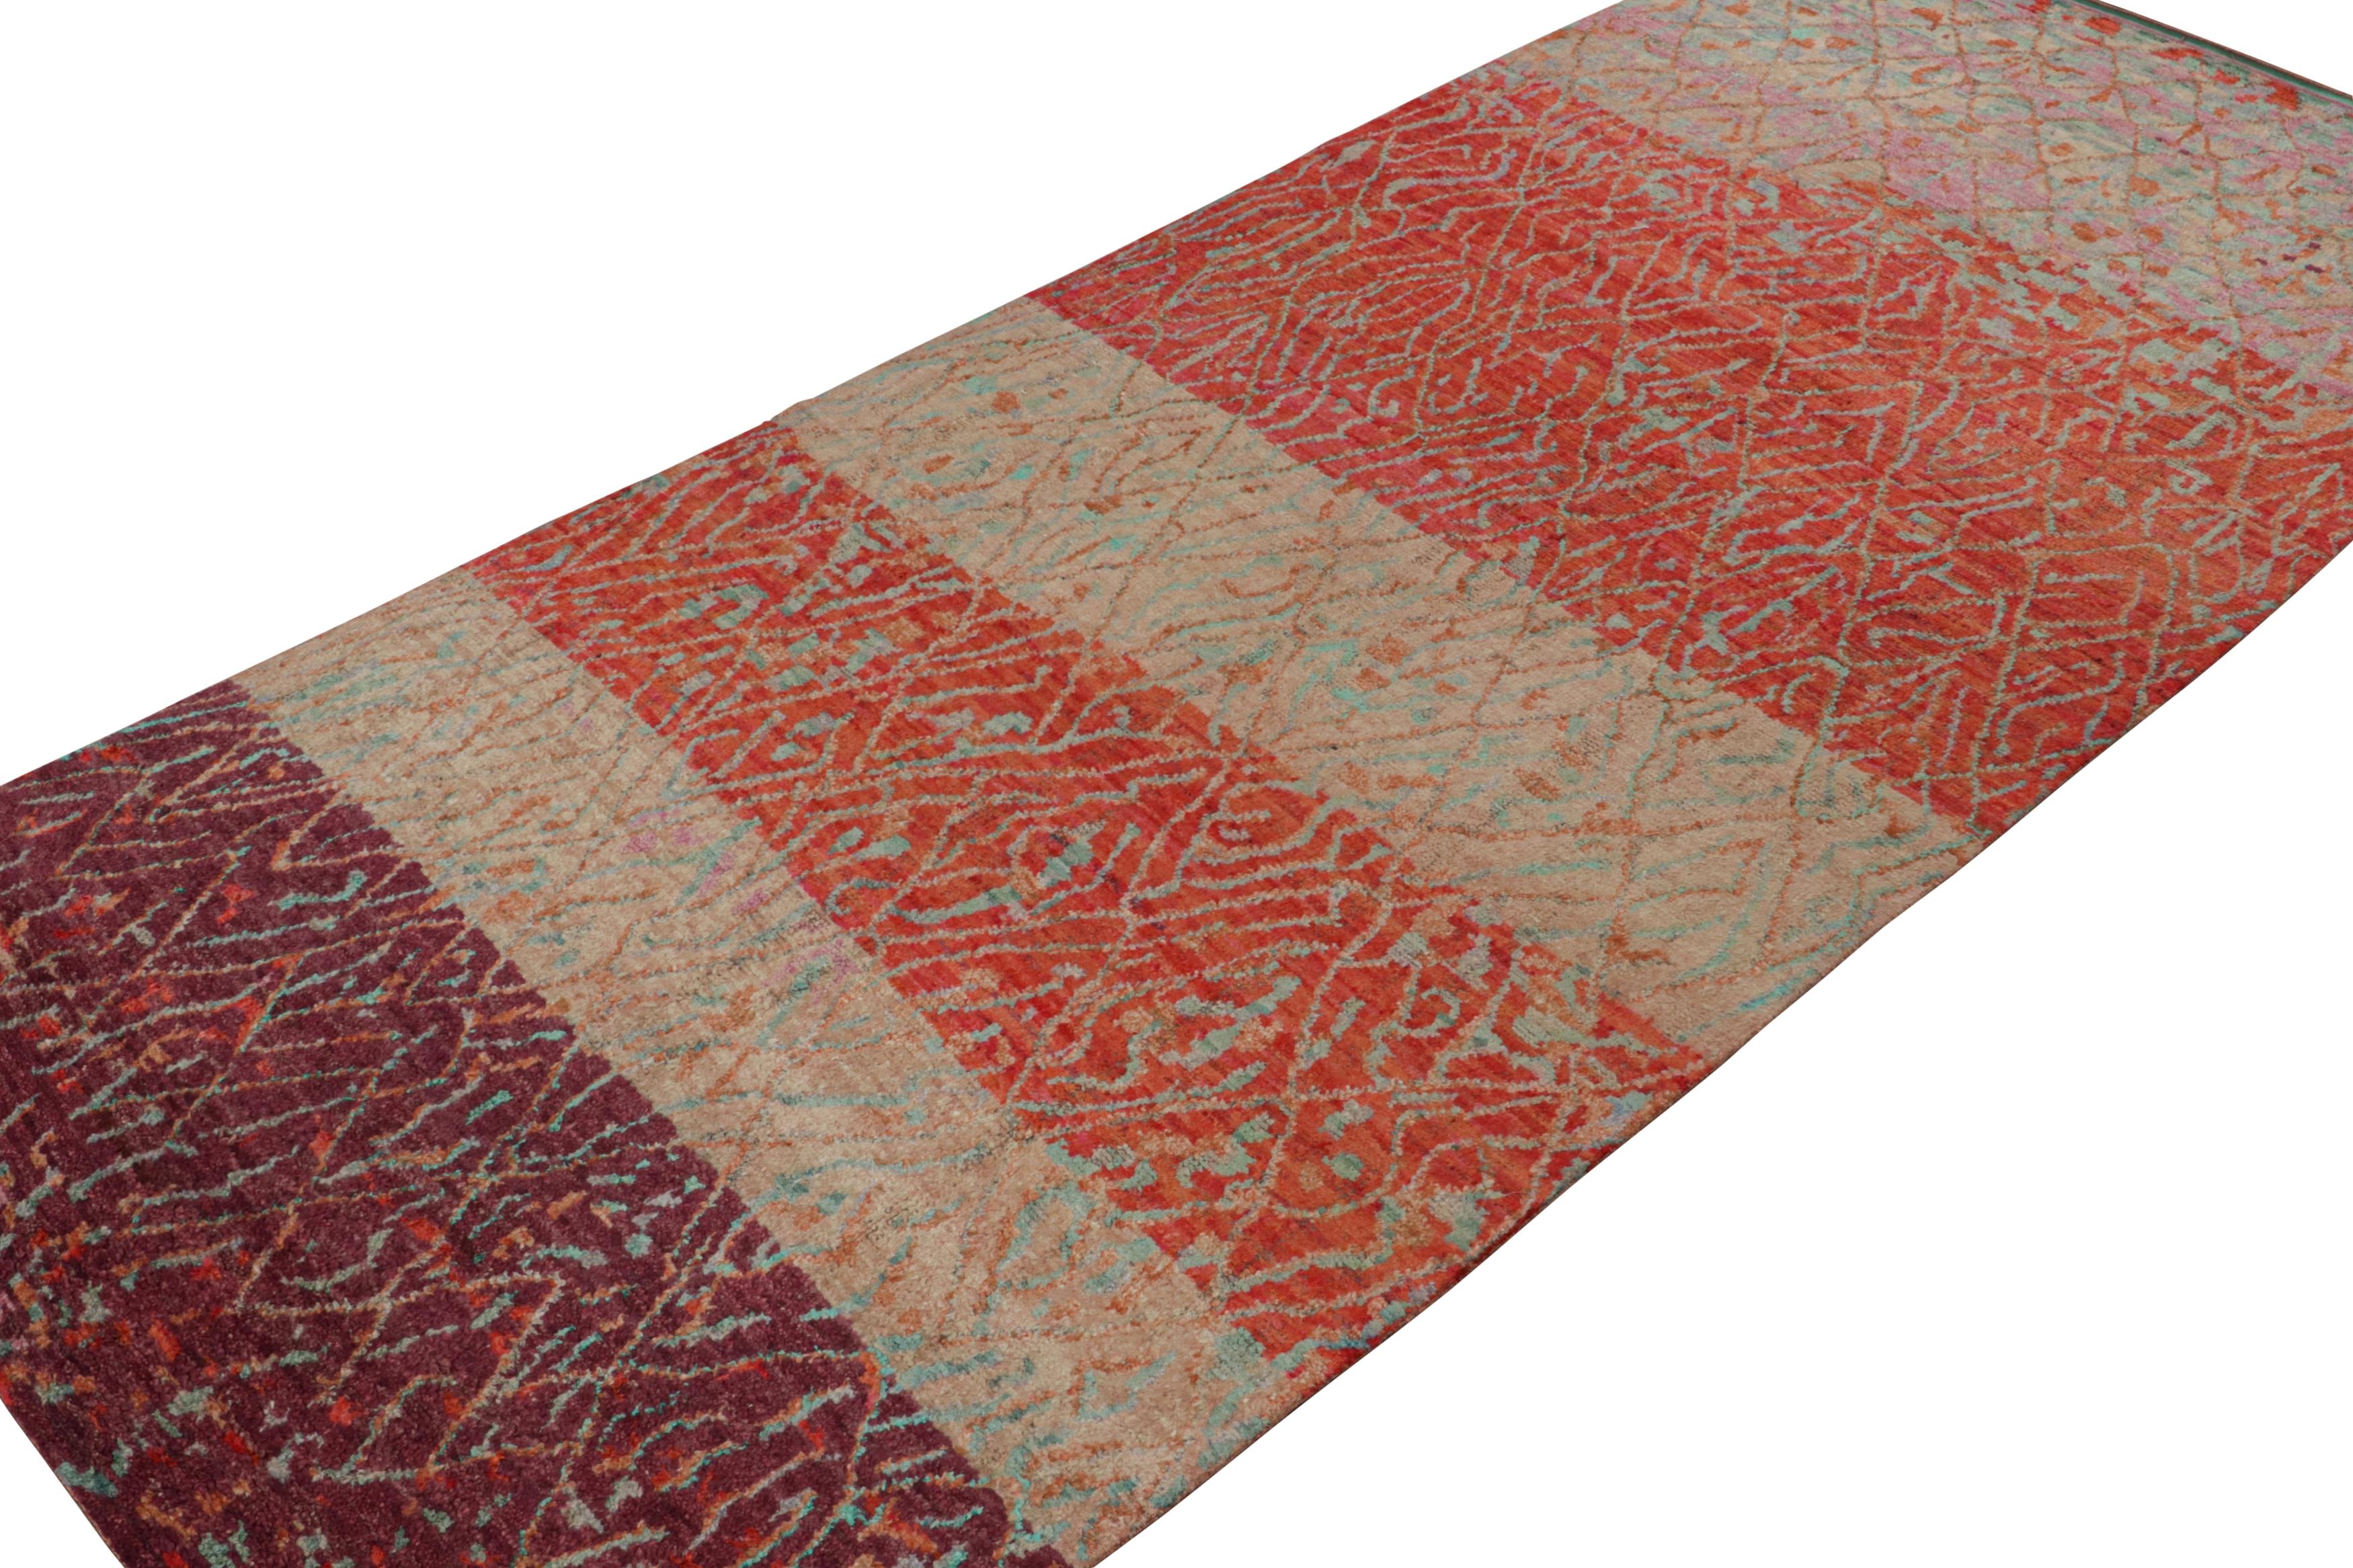 Hand-knotted in wool, silk & cotton, this 7x16 gallery runner is a new addition to the Moroccan Collection by Rug & Kilim. 

On the Design

This rug explores primitivist geometric patterns and a modern take on the boucherouite texture. Warm, melting